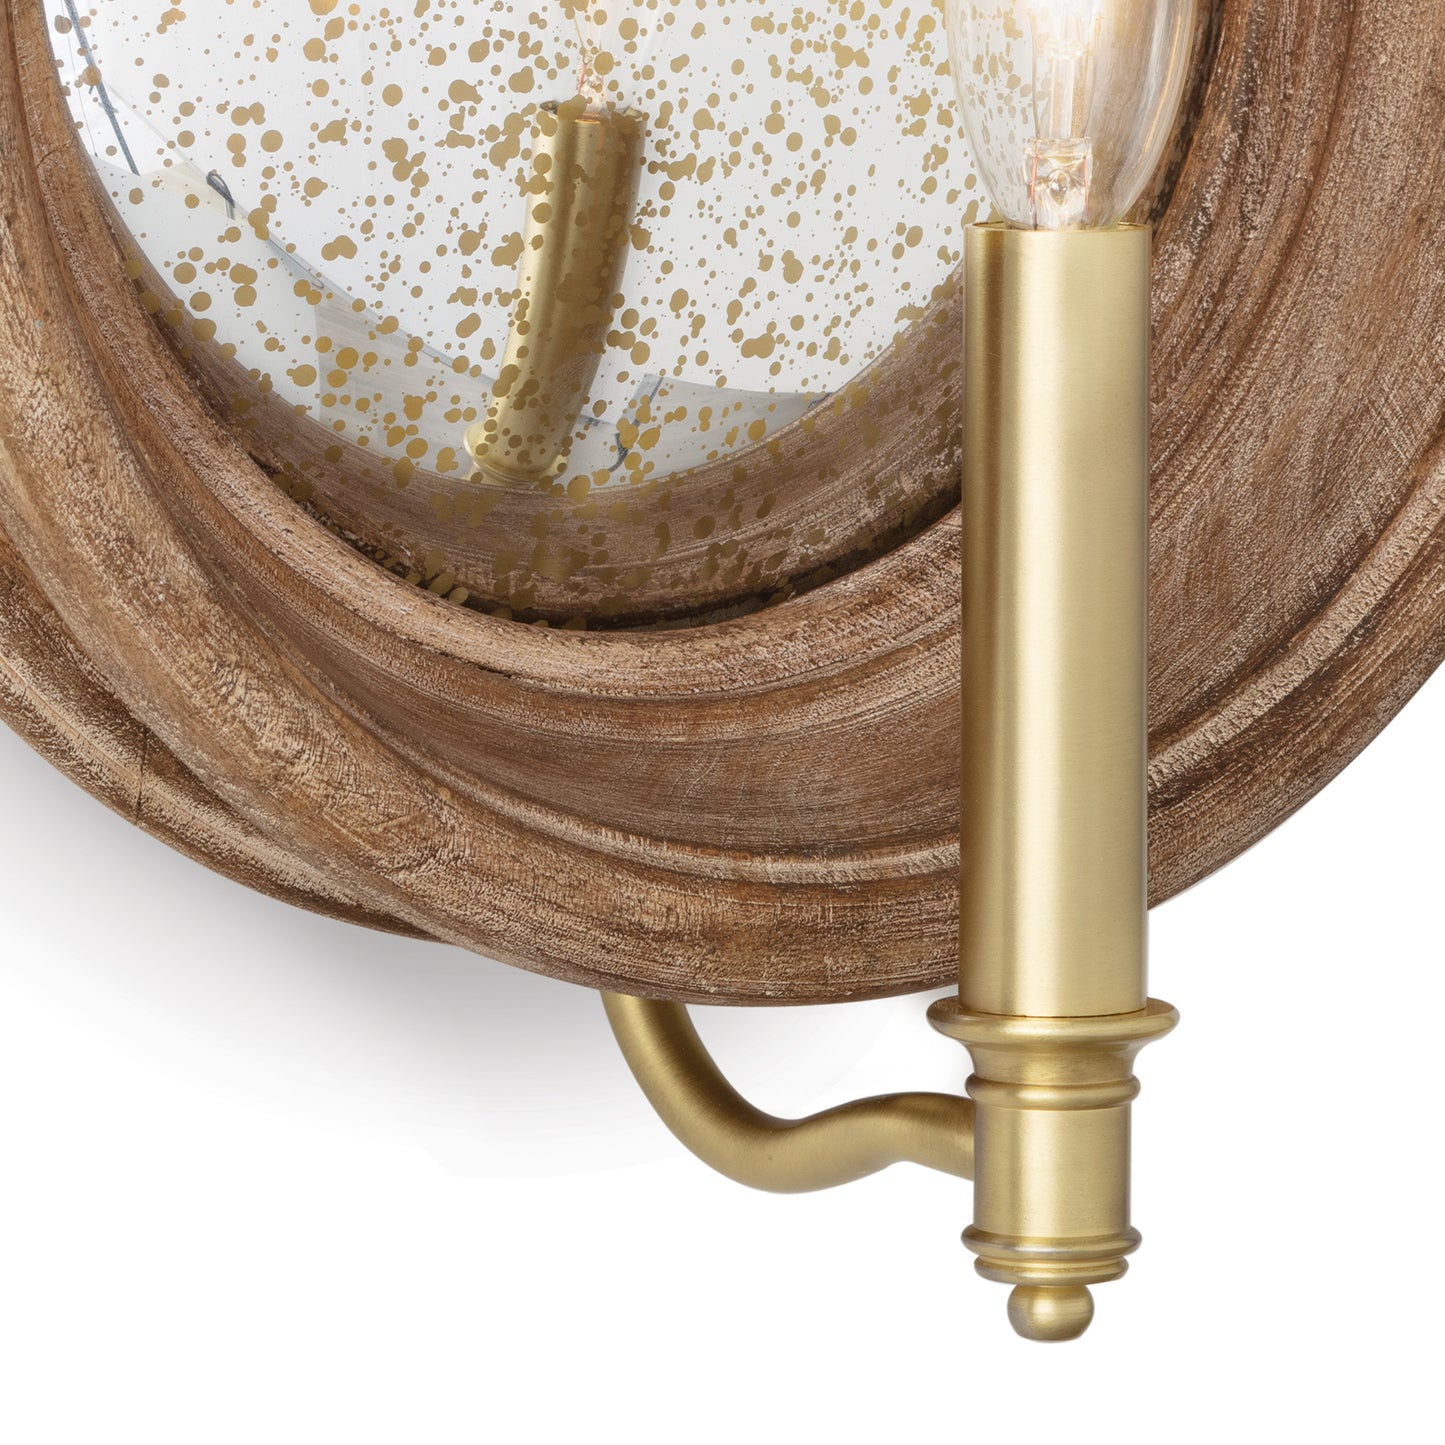 Southern Living Boundary Wood Sconce in Natural